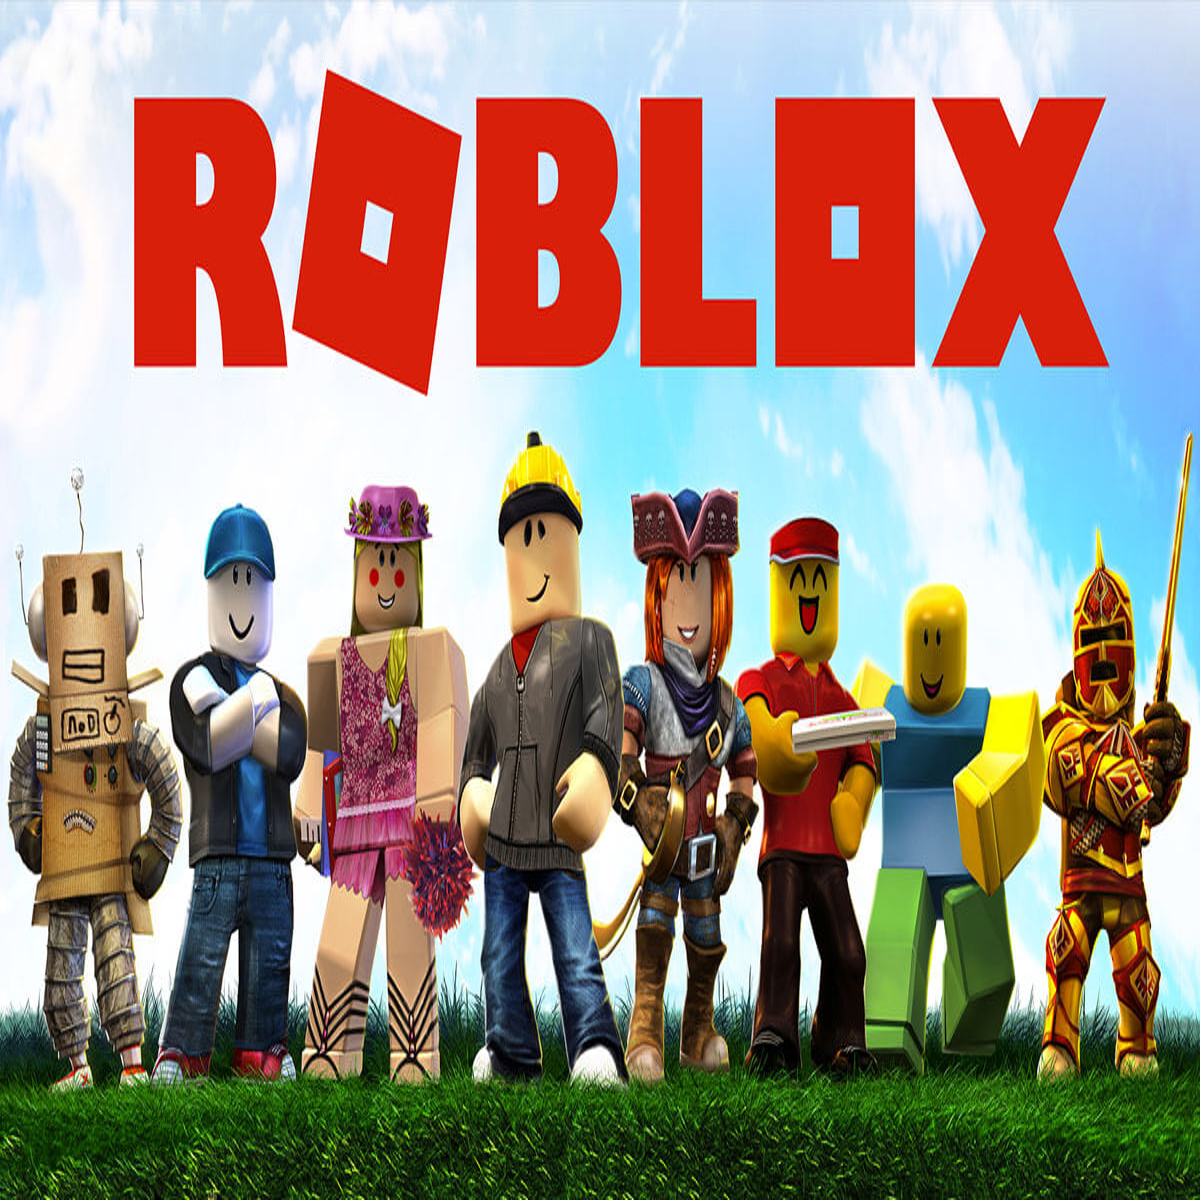 All Robux items cannot be purchased - Engine Bugs - Developer Forum